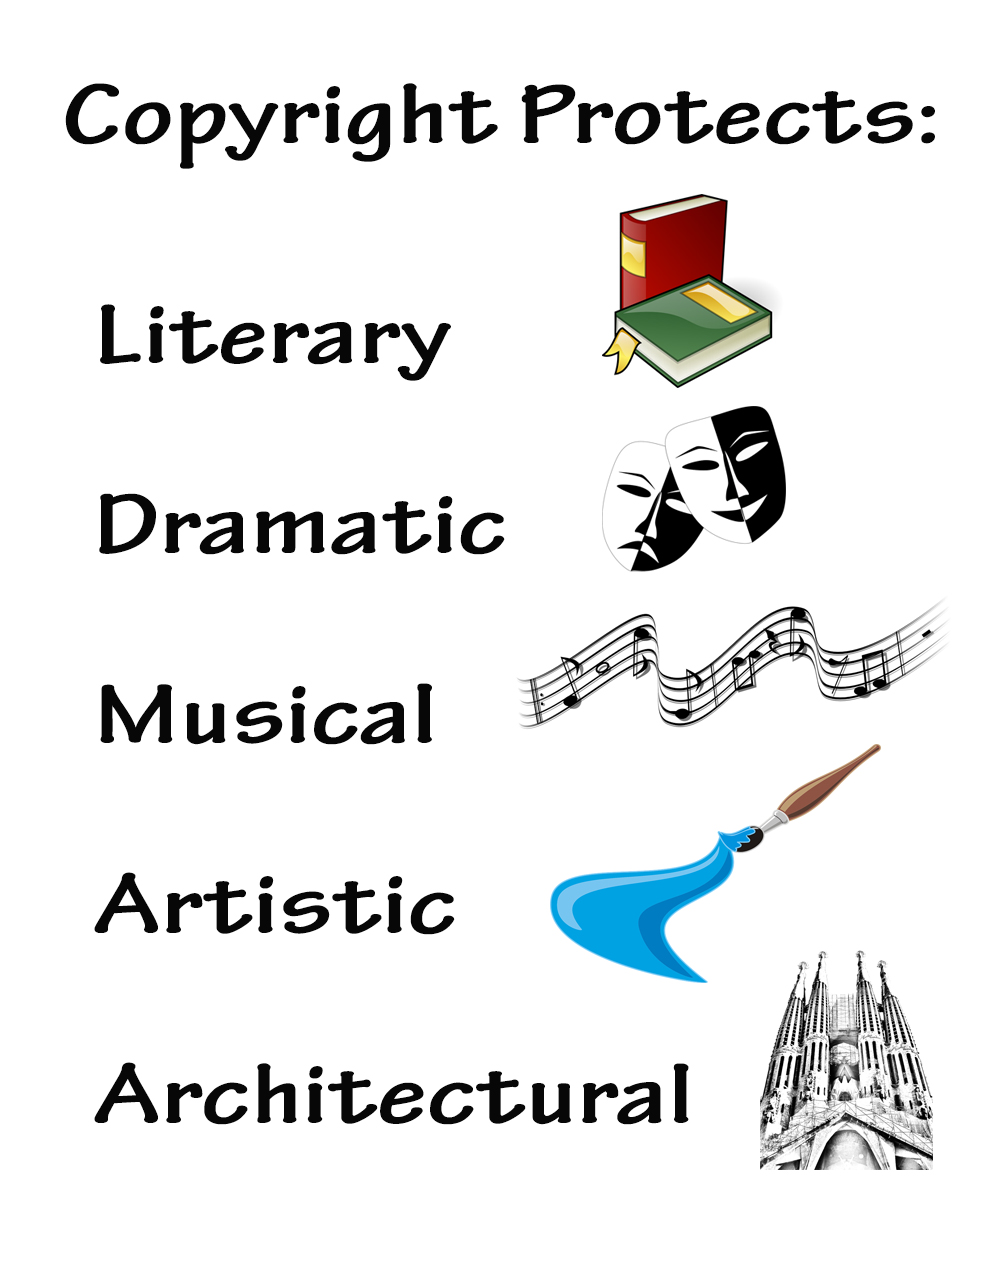 Copyright Is Not Protected Under Copyright